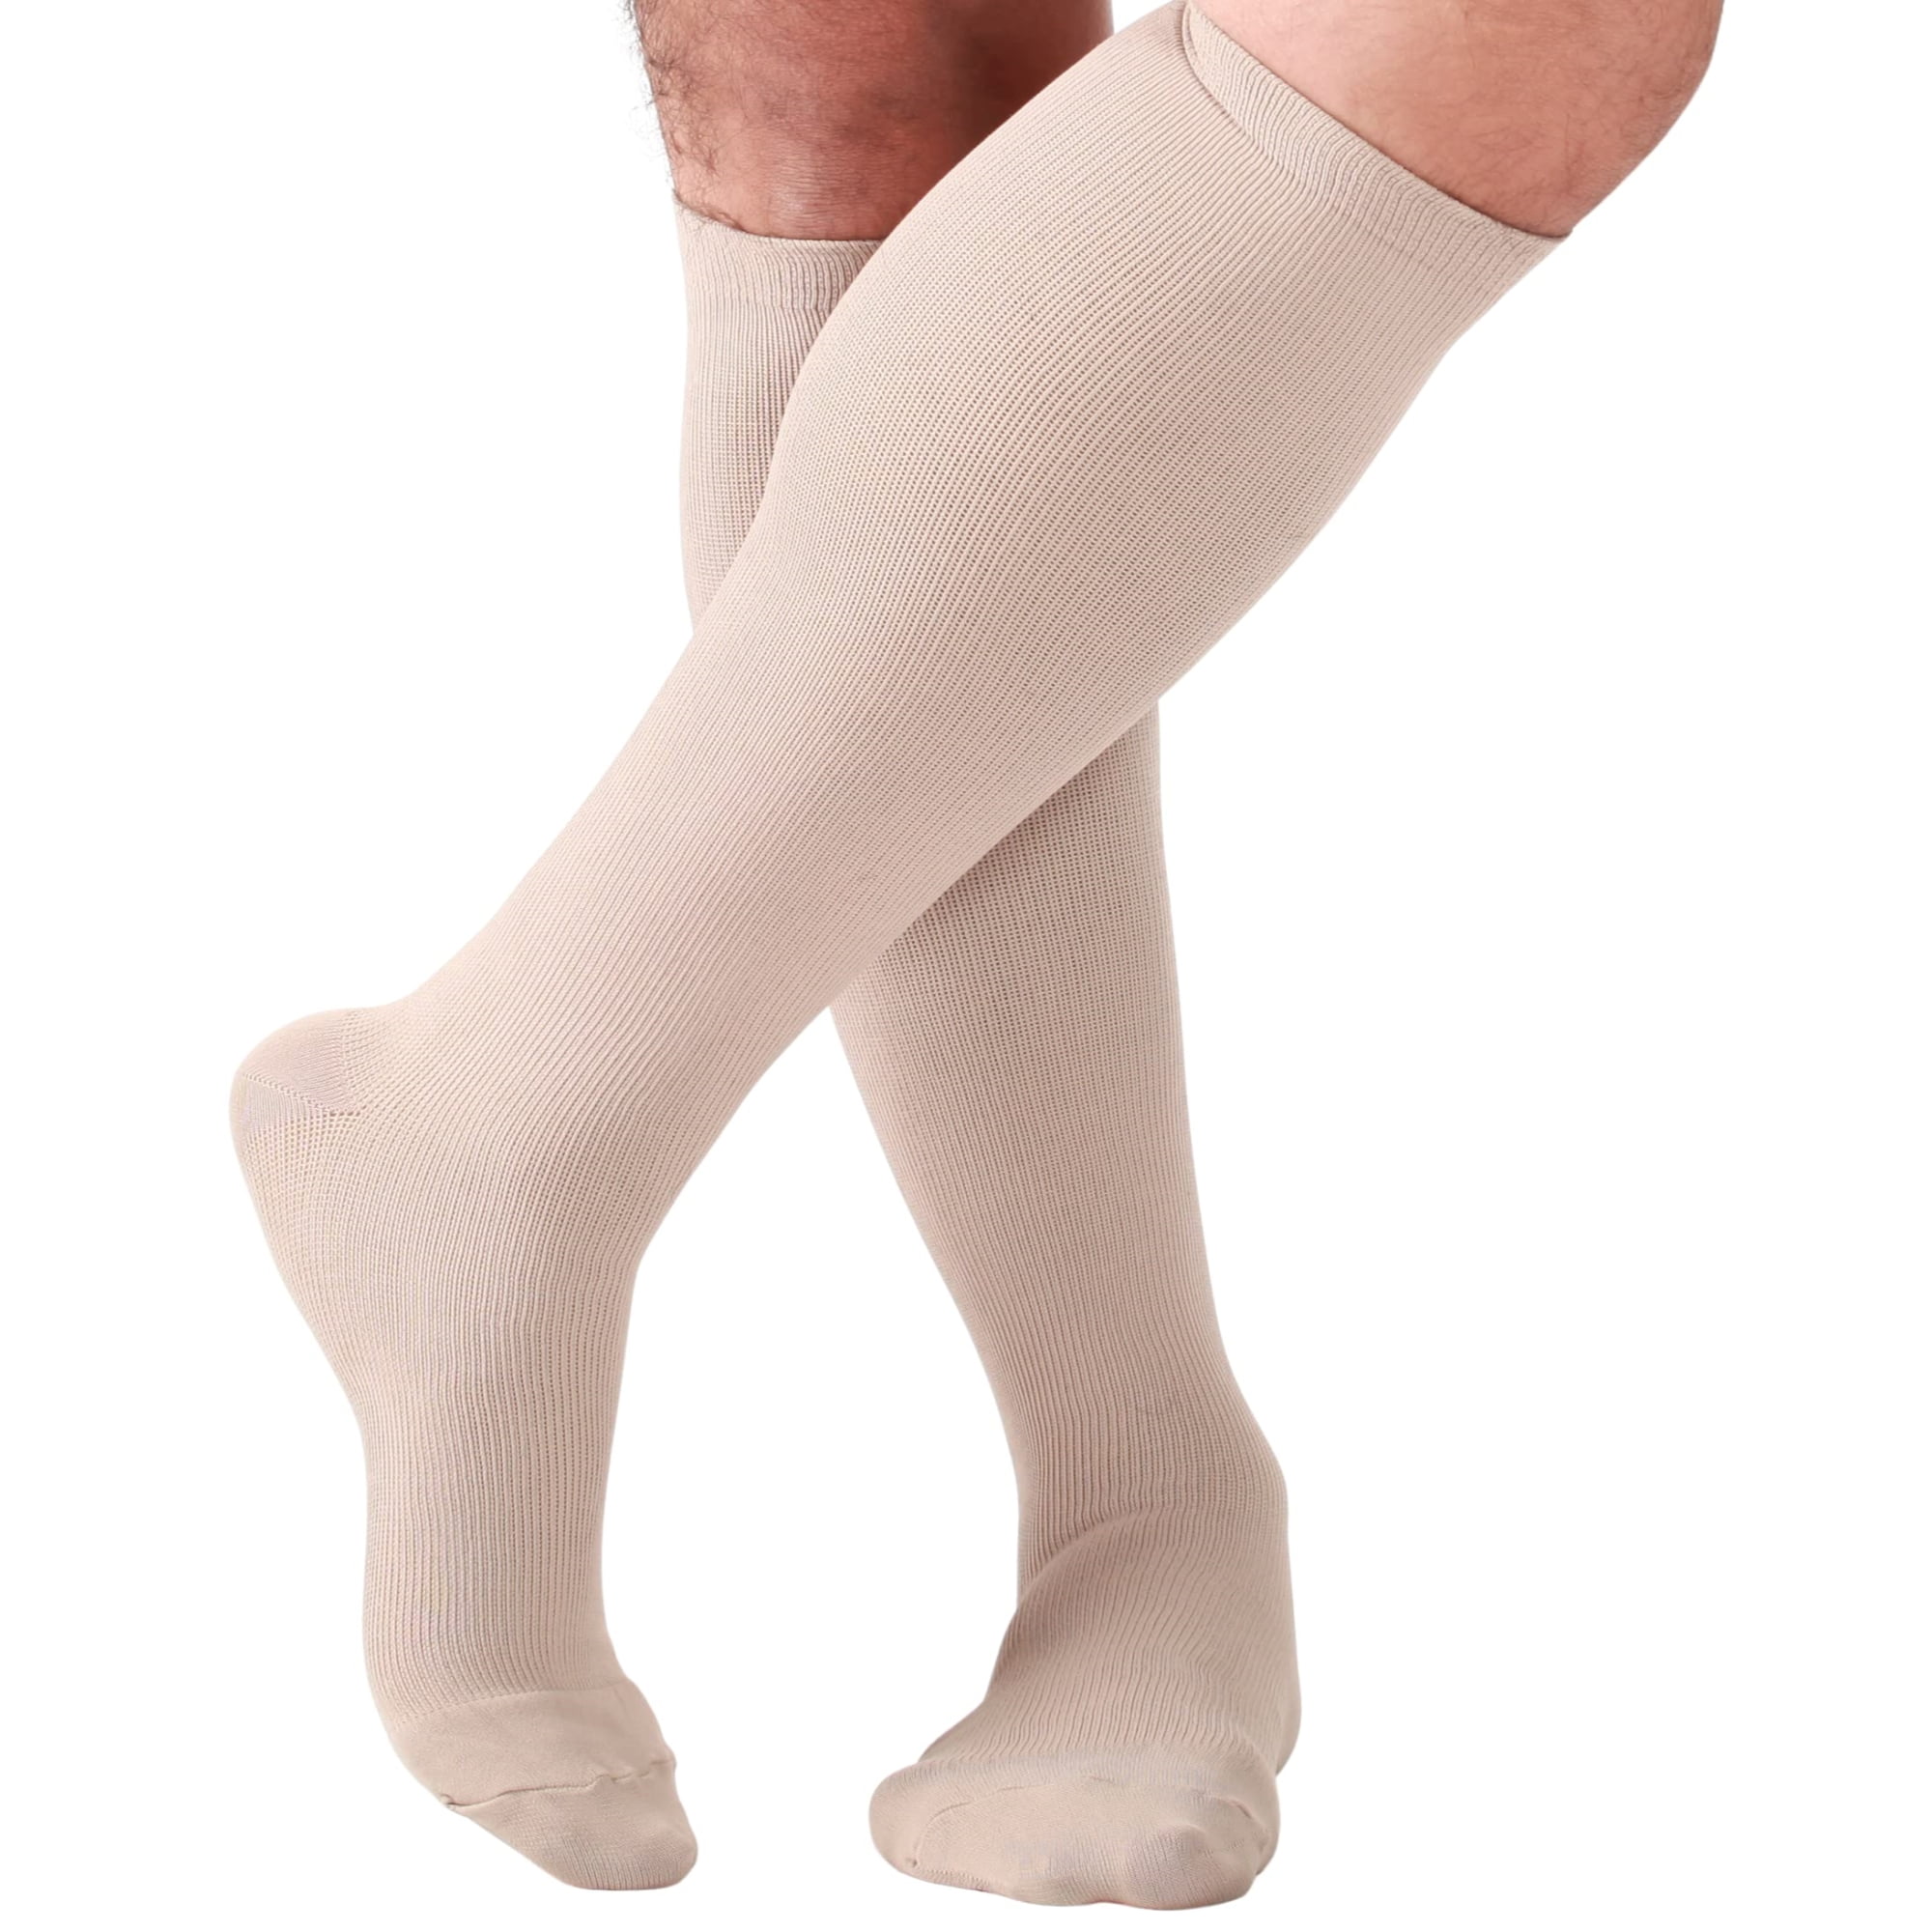 Made in USA - Compression Knee High for Men Circulation 15-20 mmHg ...